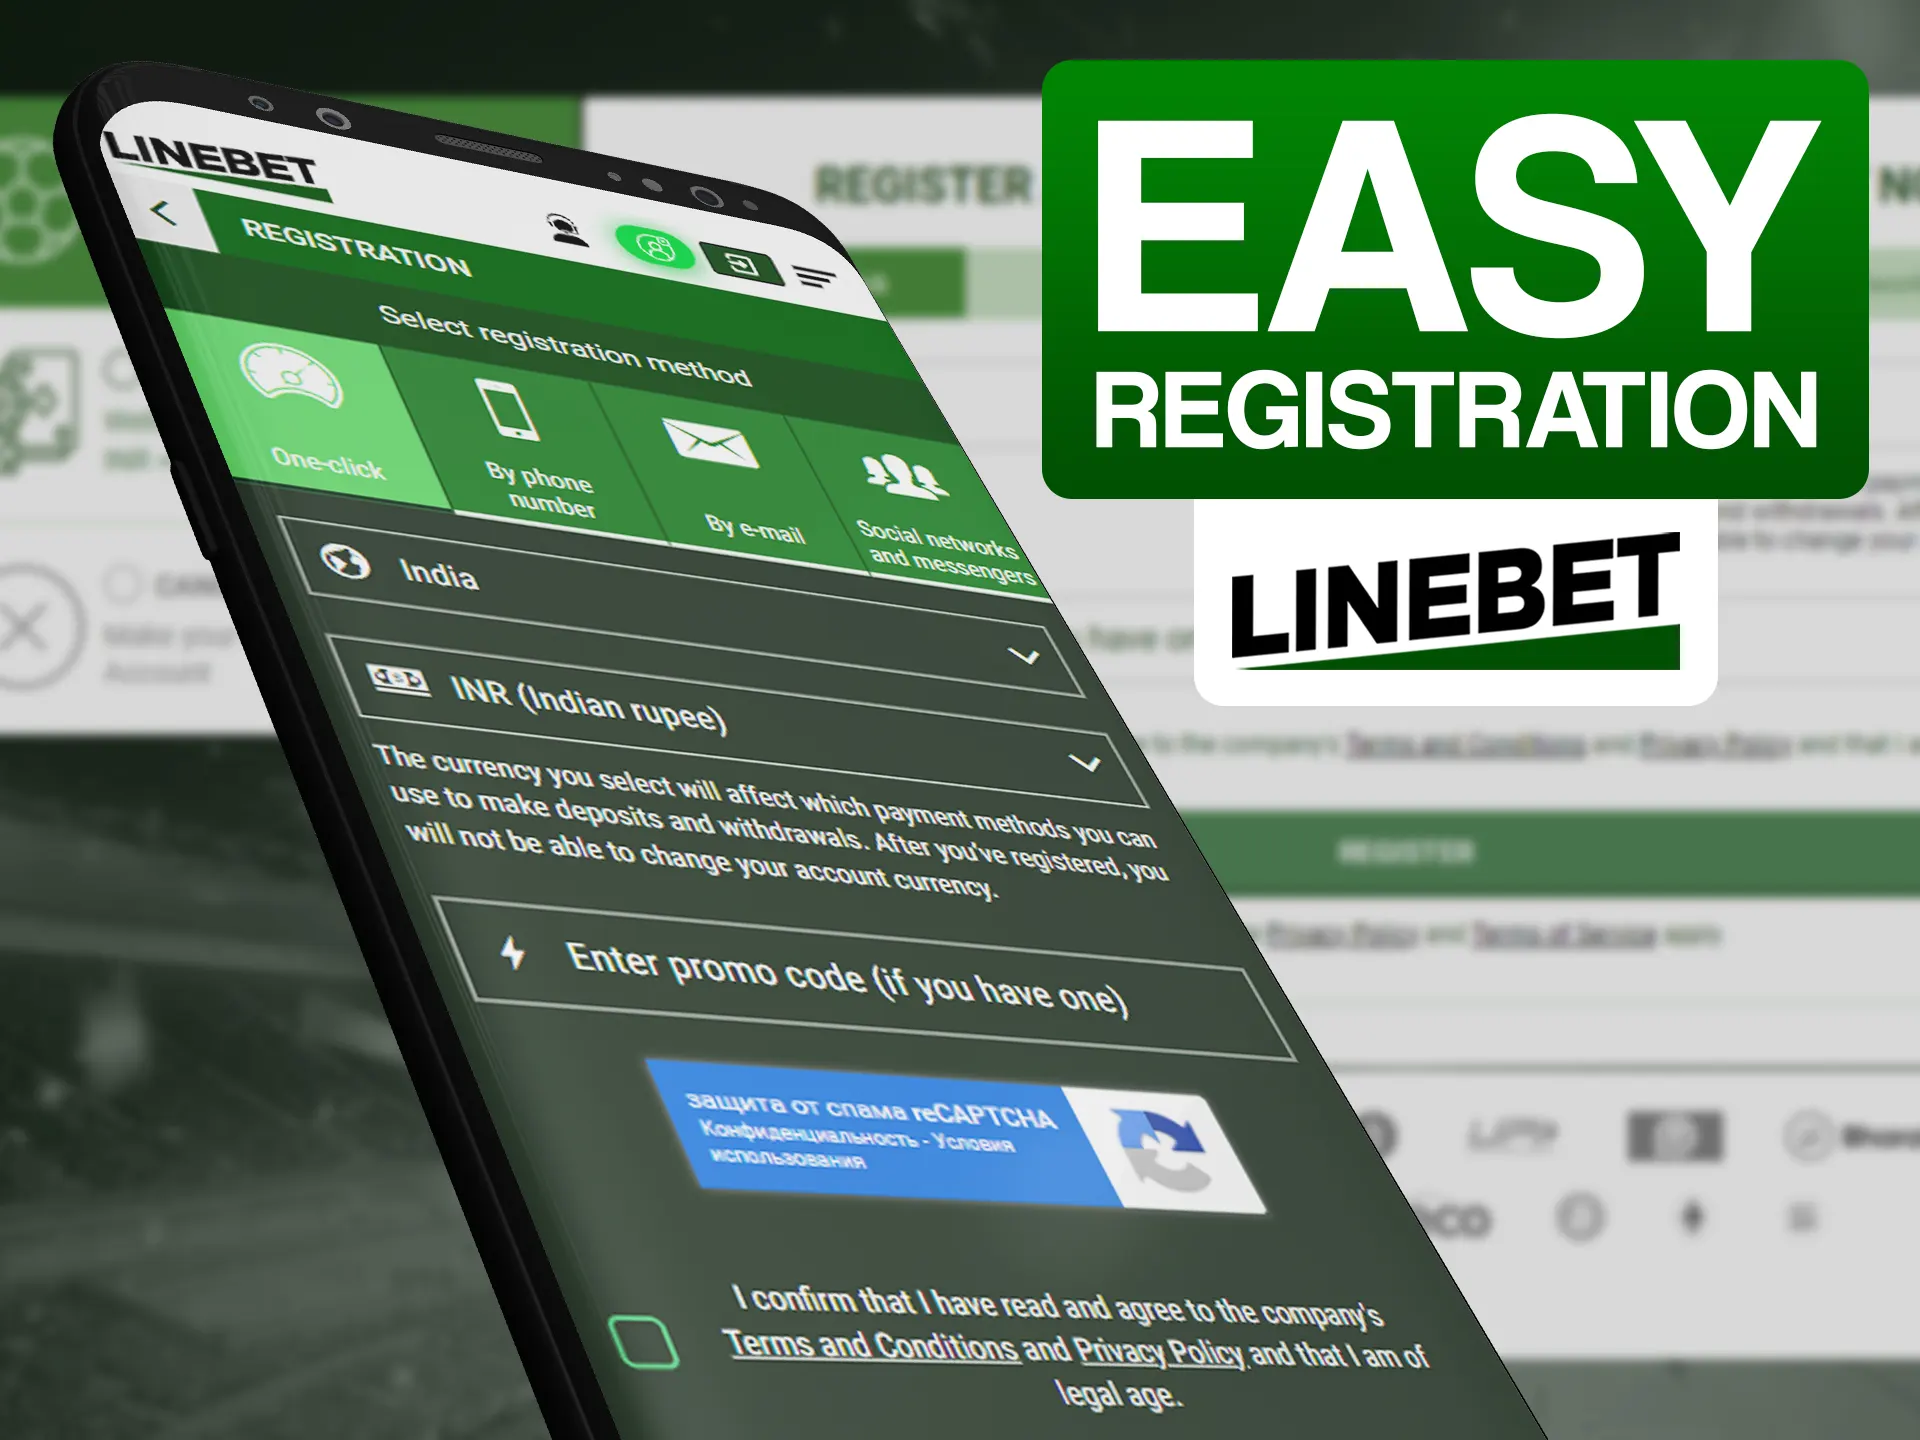 Register easily with four steps at Linebet.